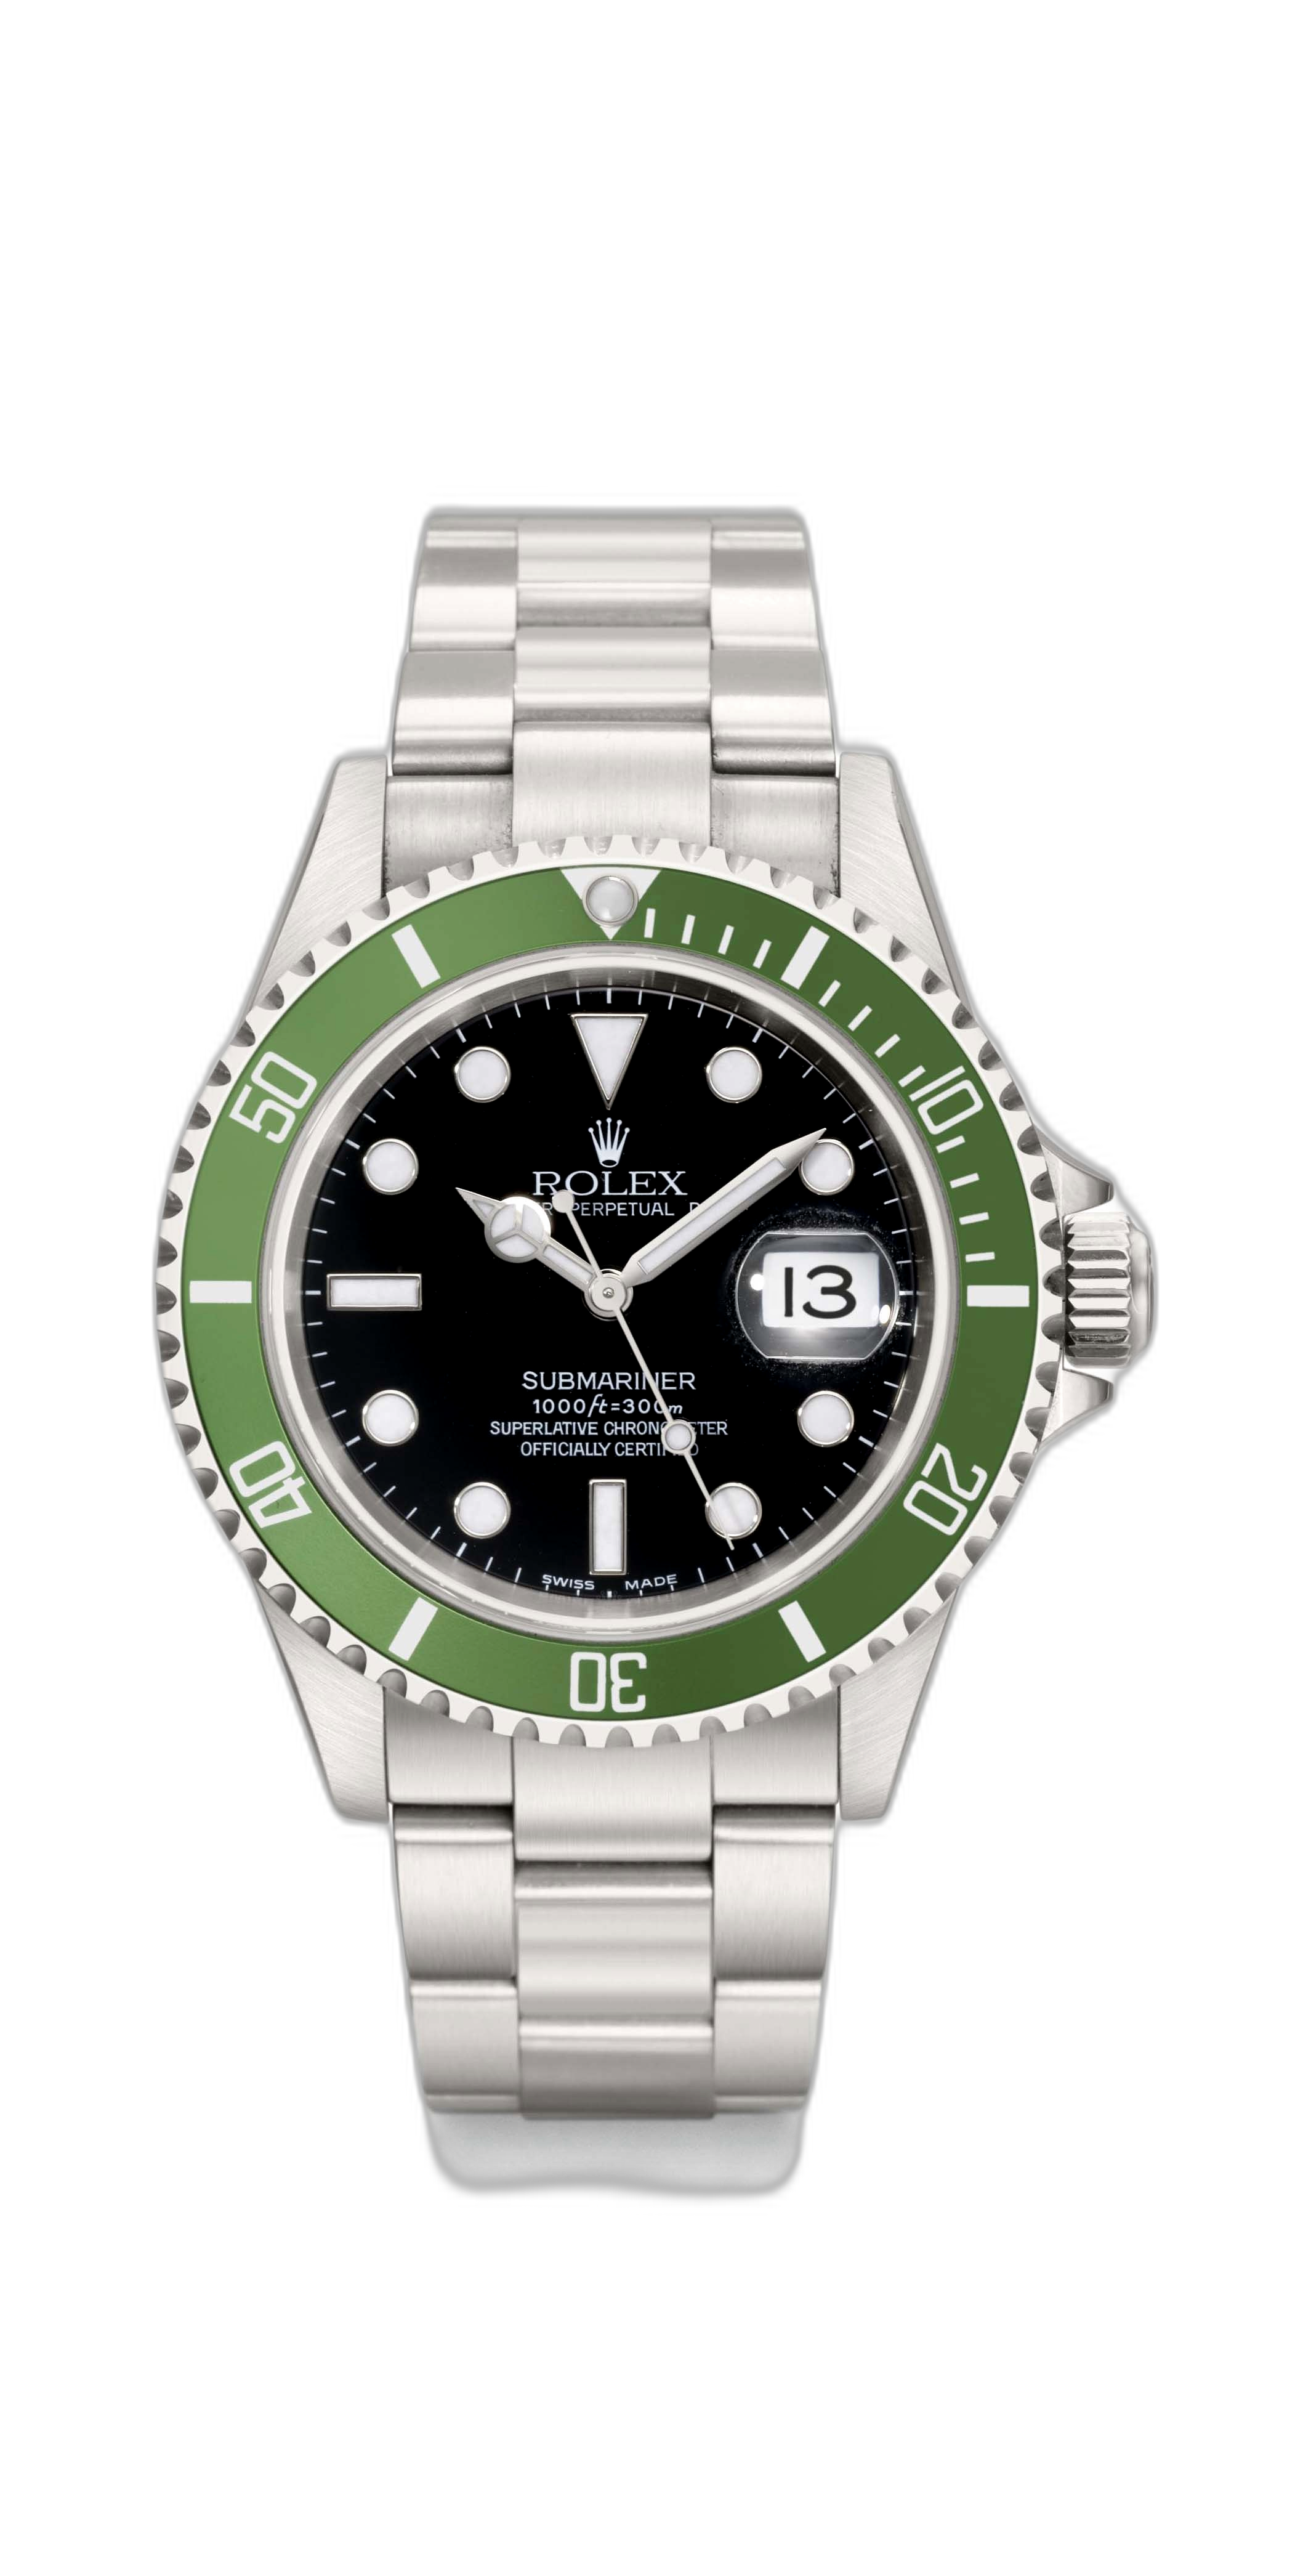 Pre-Owned Rolex Submariner 16610 LV Watch